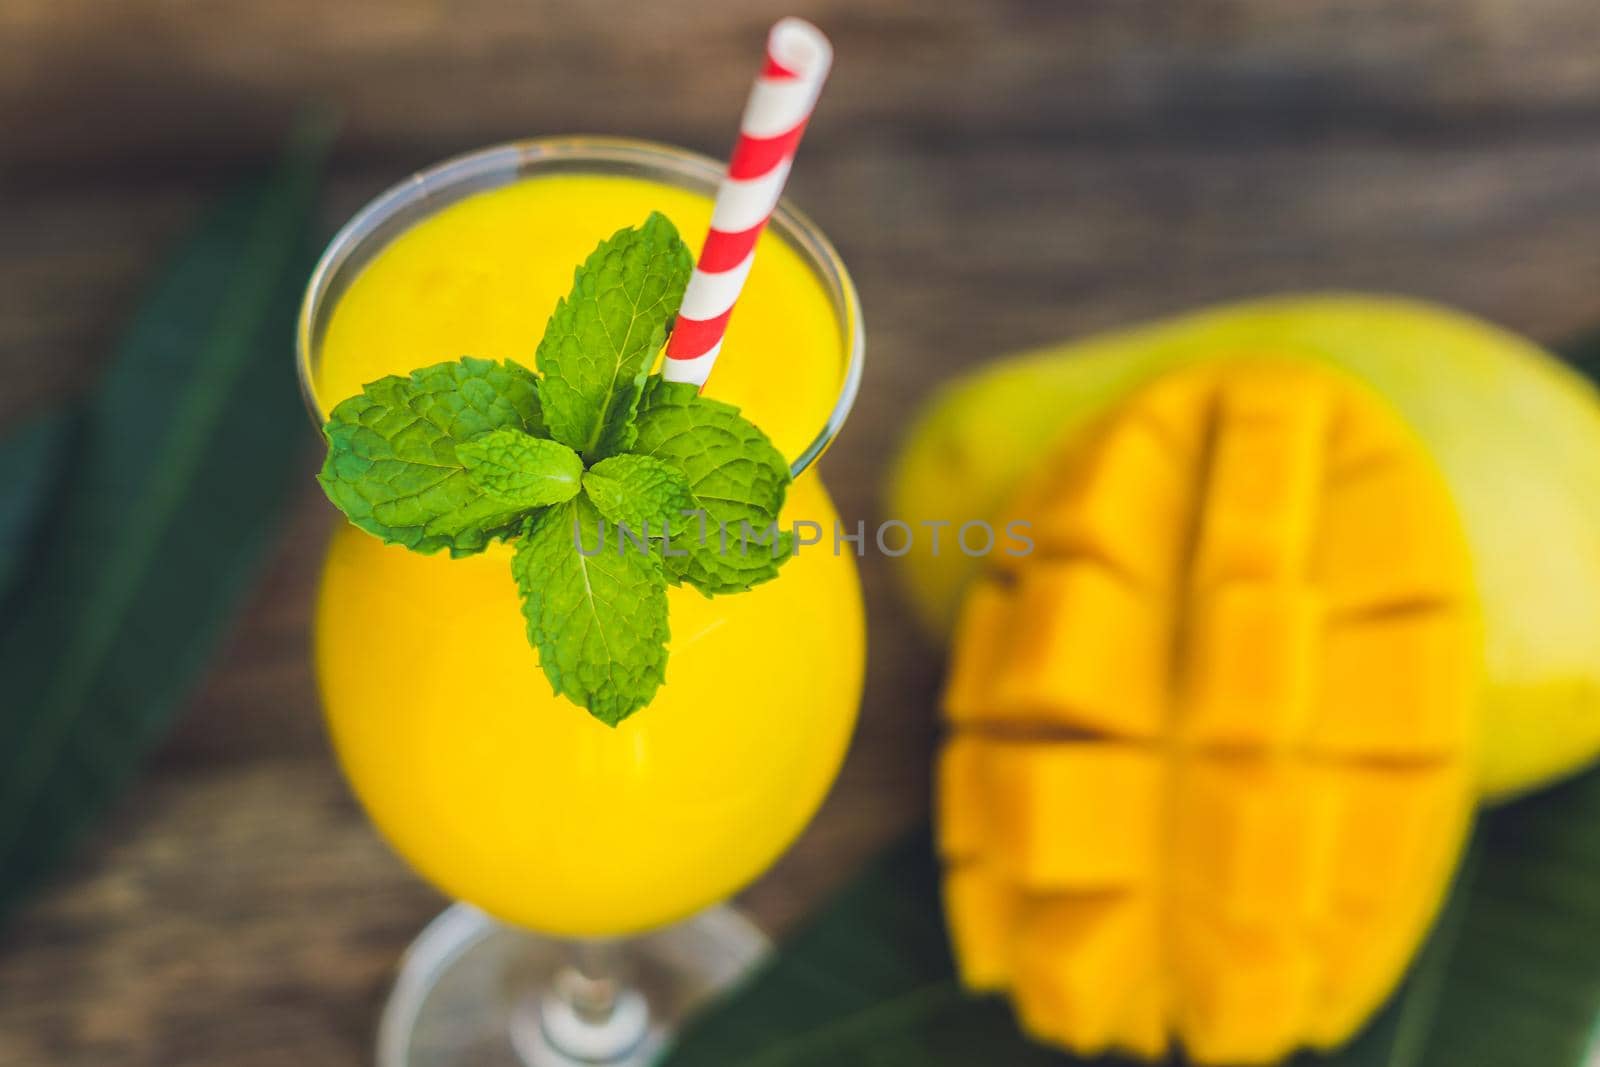 Juicy smoothie from mango in glass with striped red straw and with a mint leaf on old wooden background. Healthy life concept, copy space by galitskaya